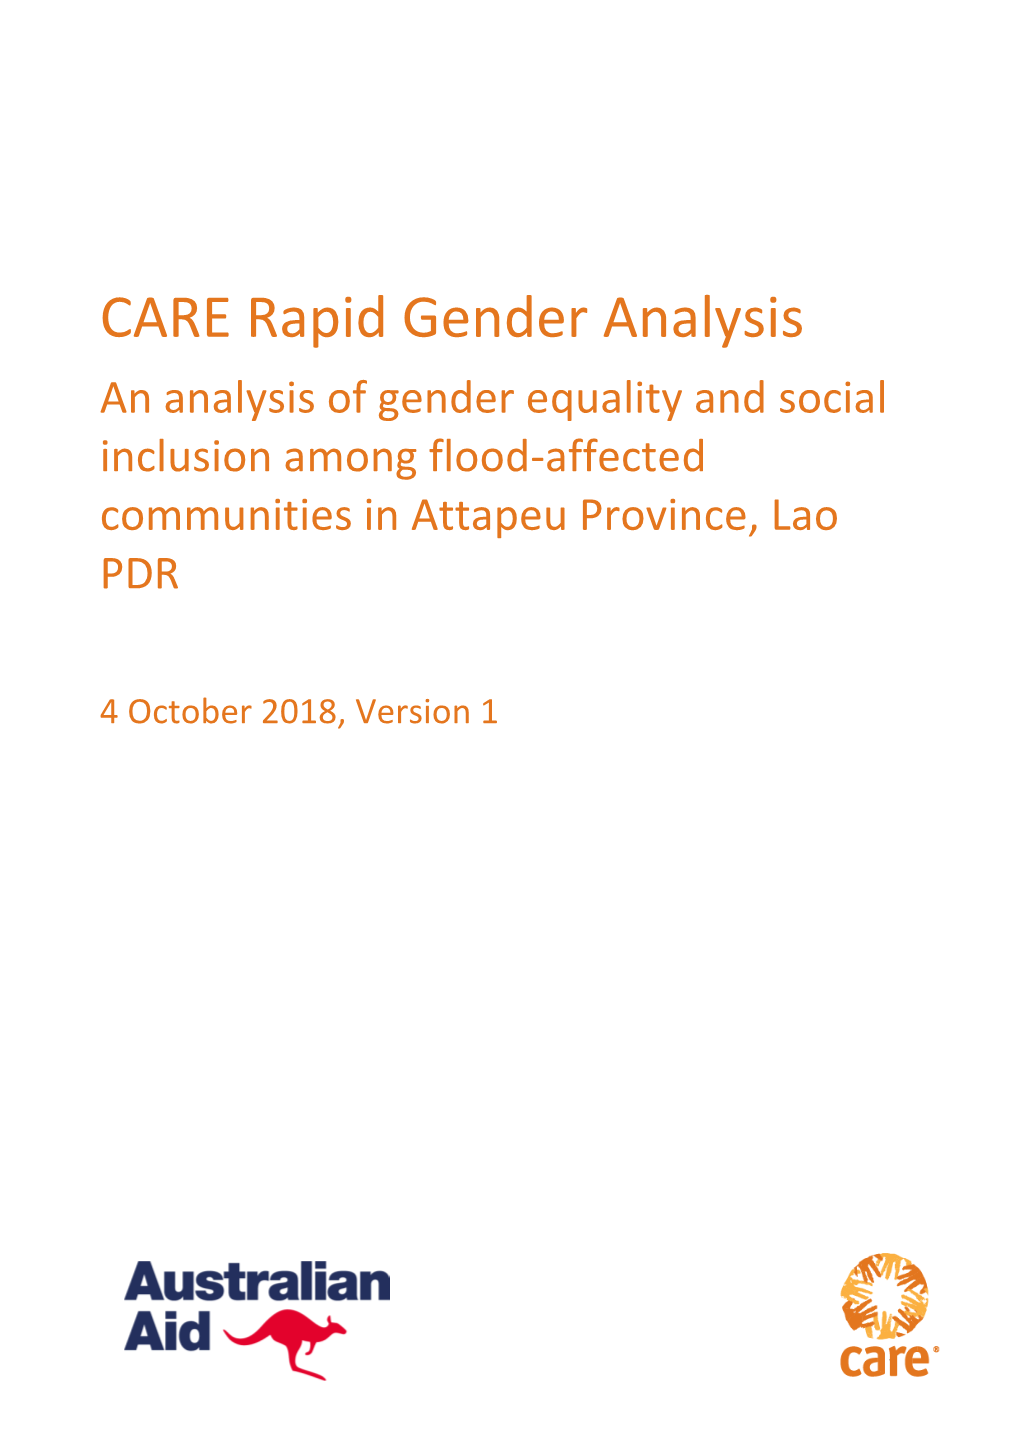 CARE Rapid Gender Analysis an Analysis of Gender Equality and Social Inclusion Among Flood-Affected Communities in Attapeu Province, Lao PDR